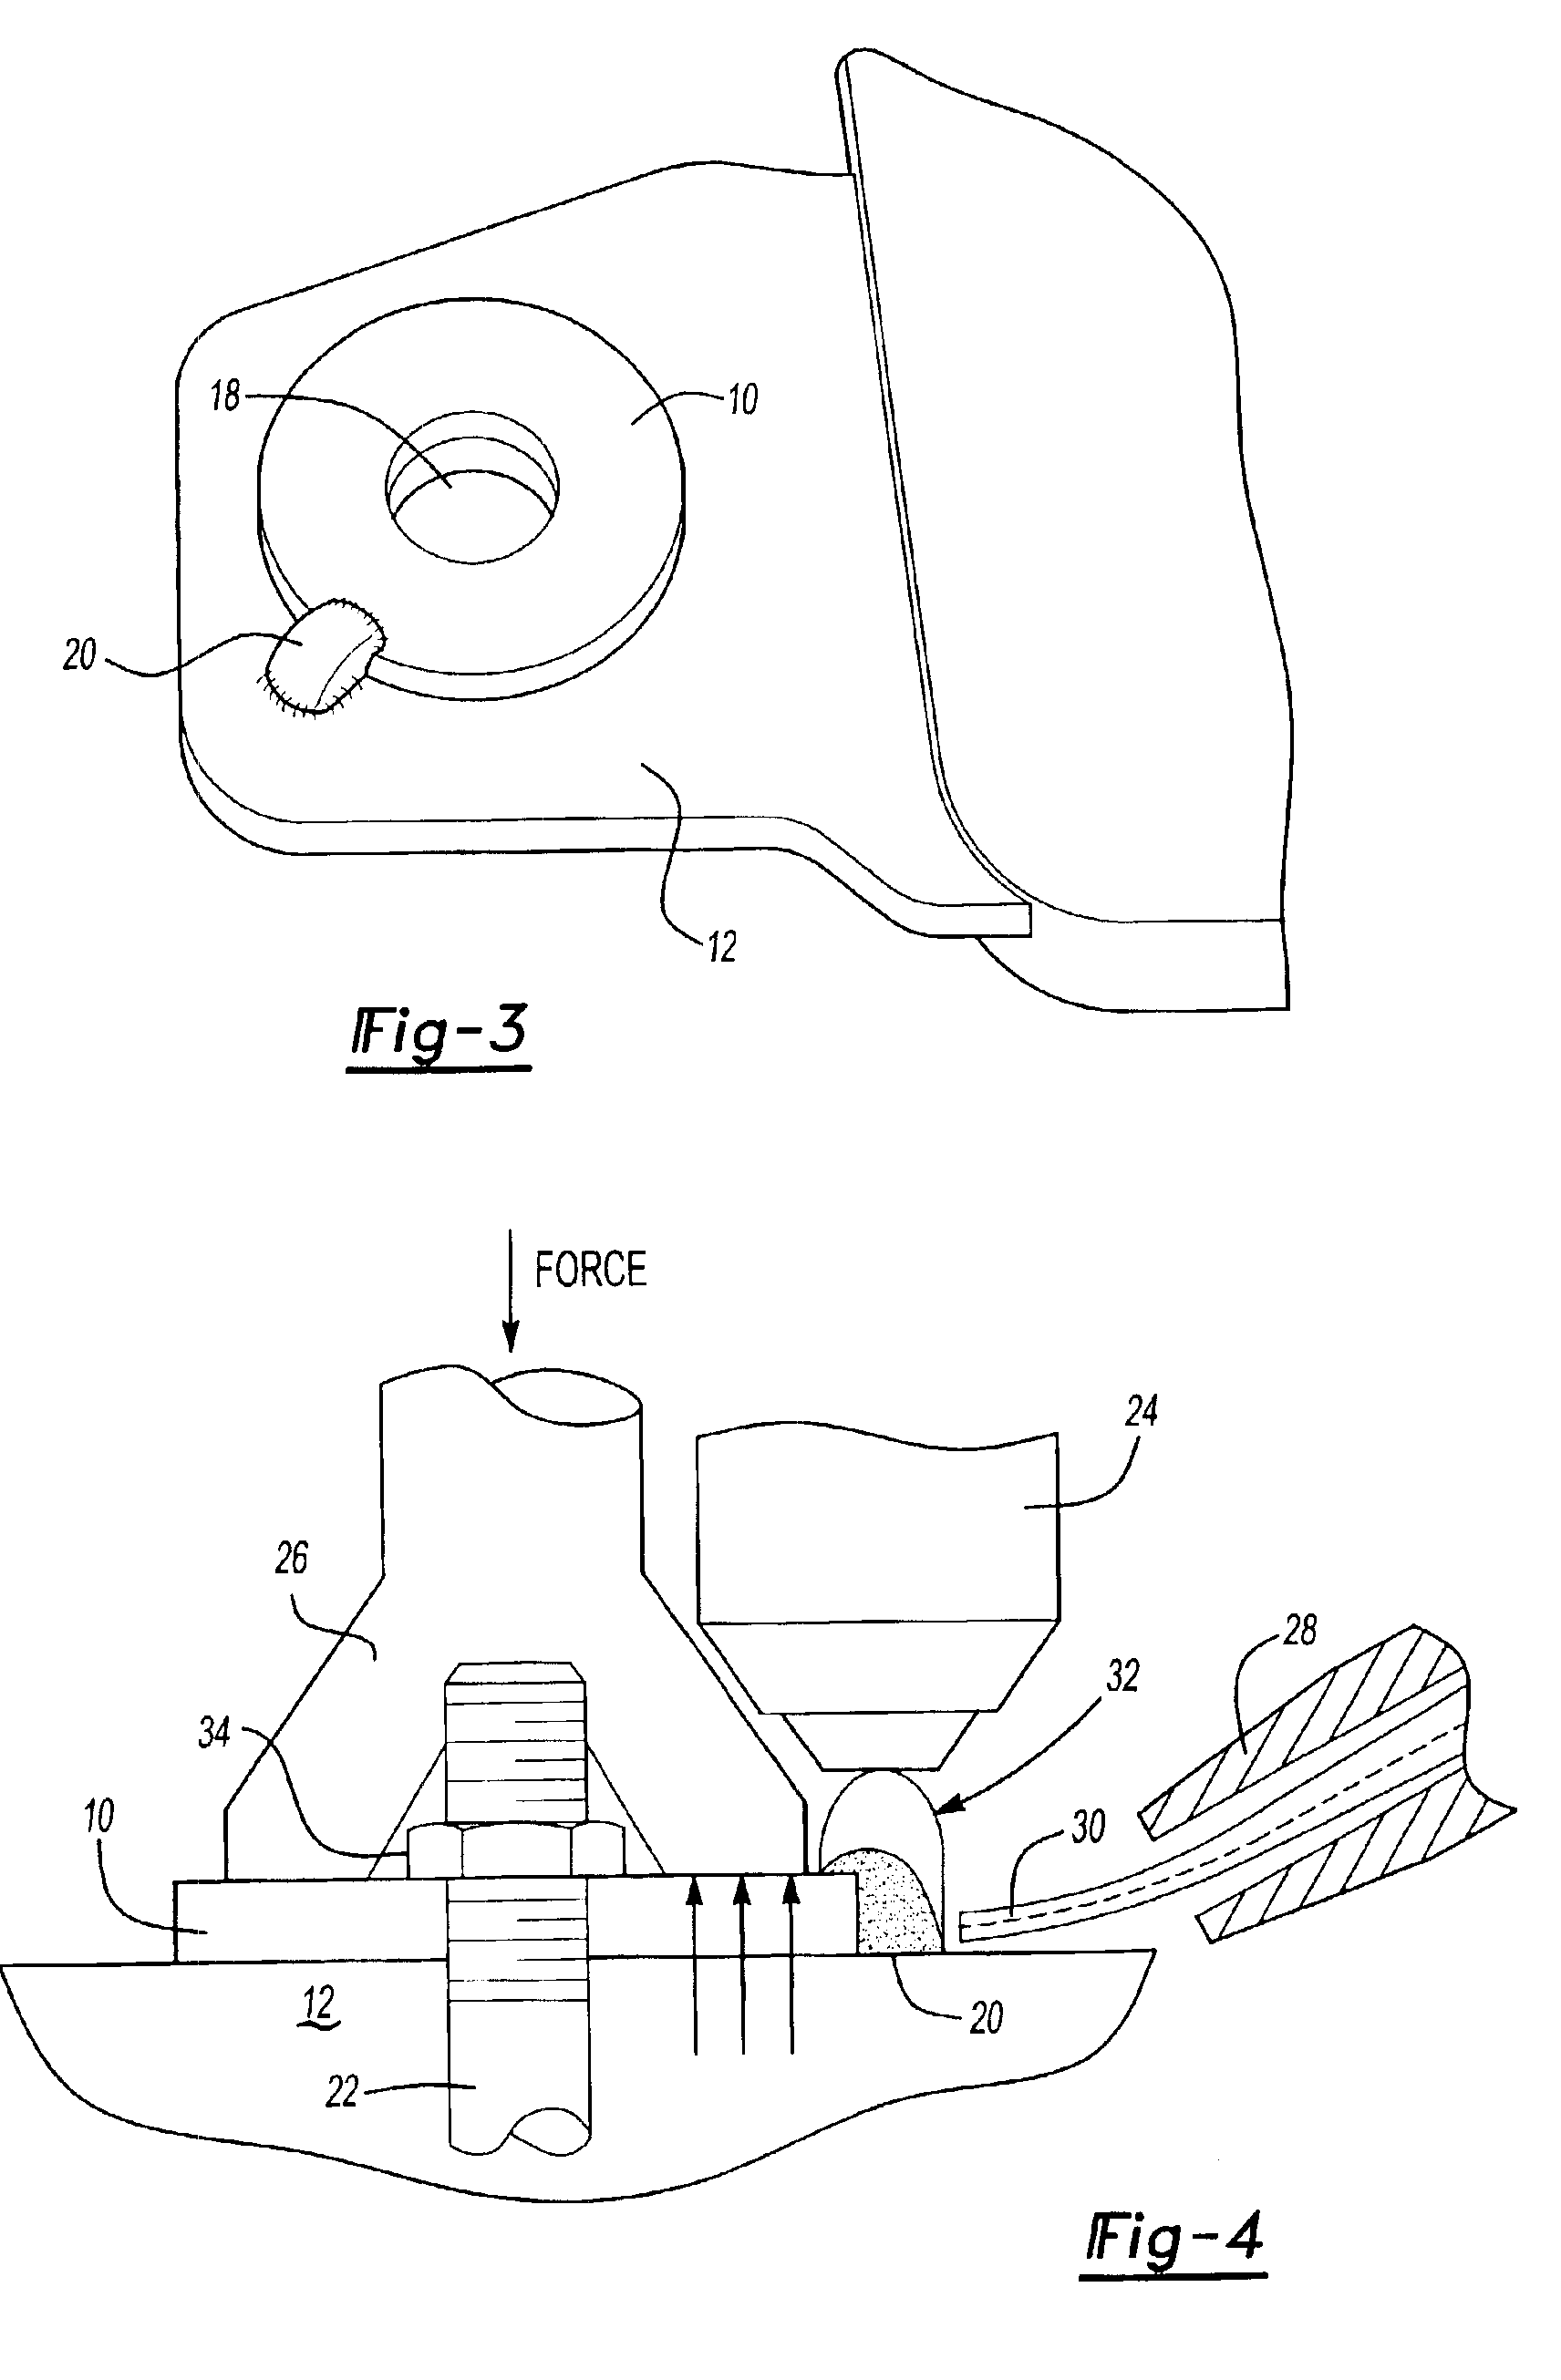 Method of attaching and aligning a closure panel